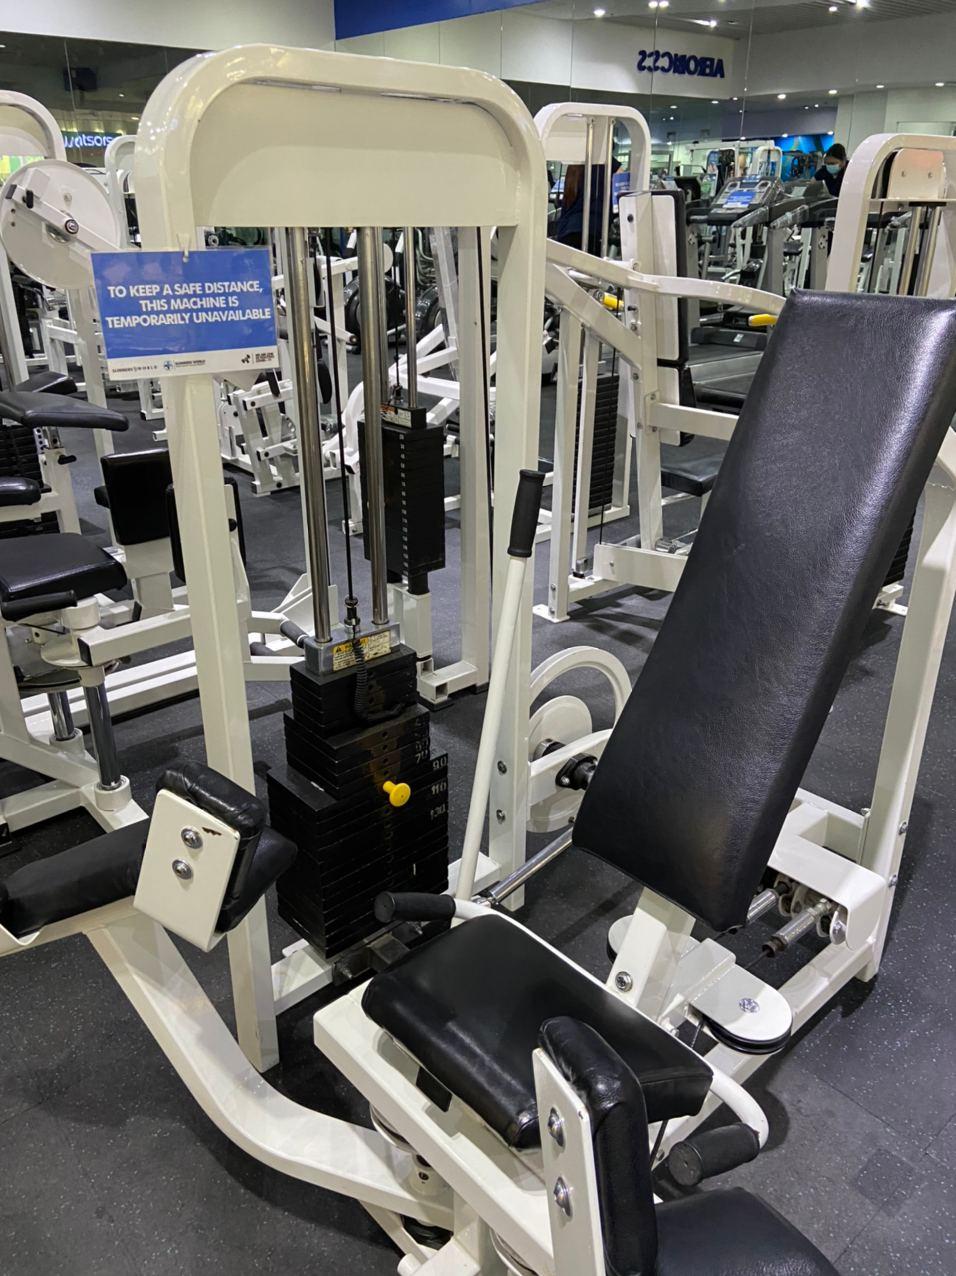 gym safety protocols - signages on workout equipment